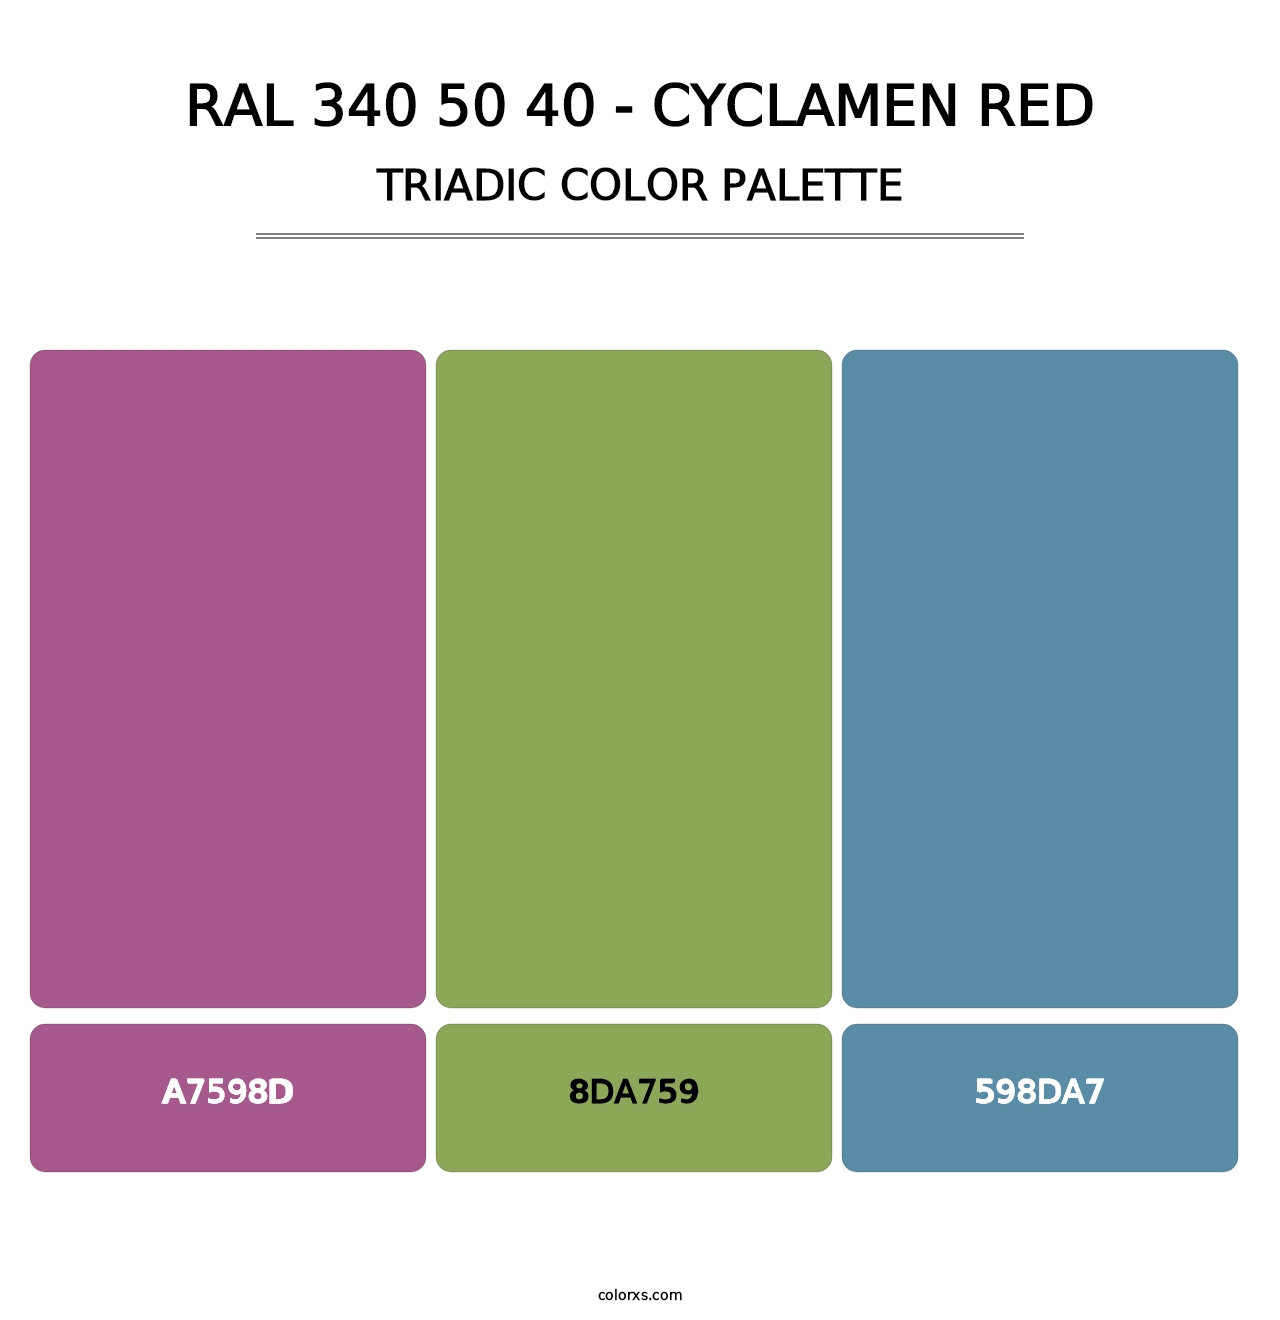 RAL 340 50 40 - Cyclamen Red - Triadic Color Palette